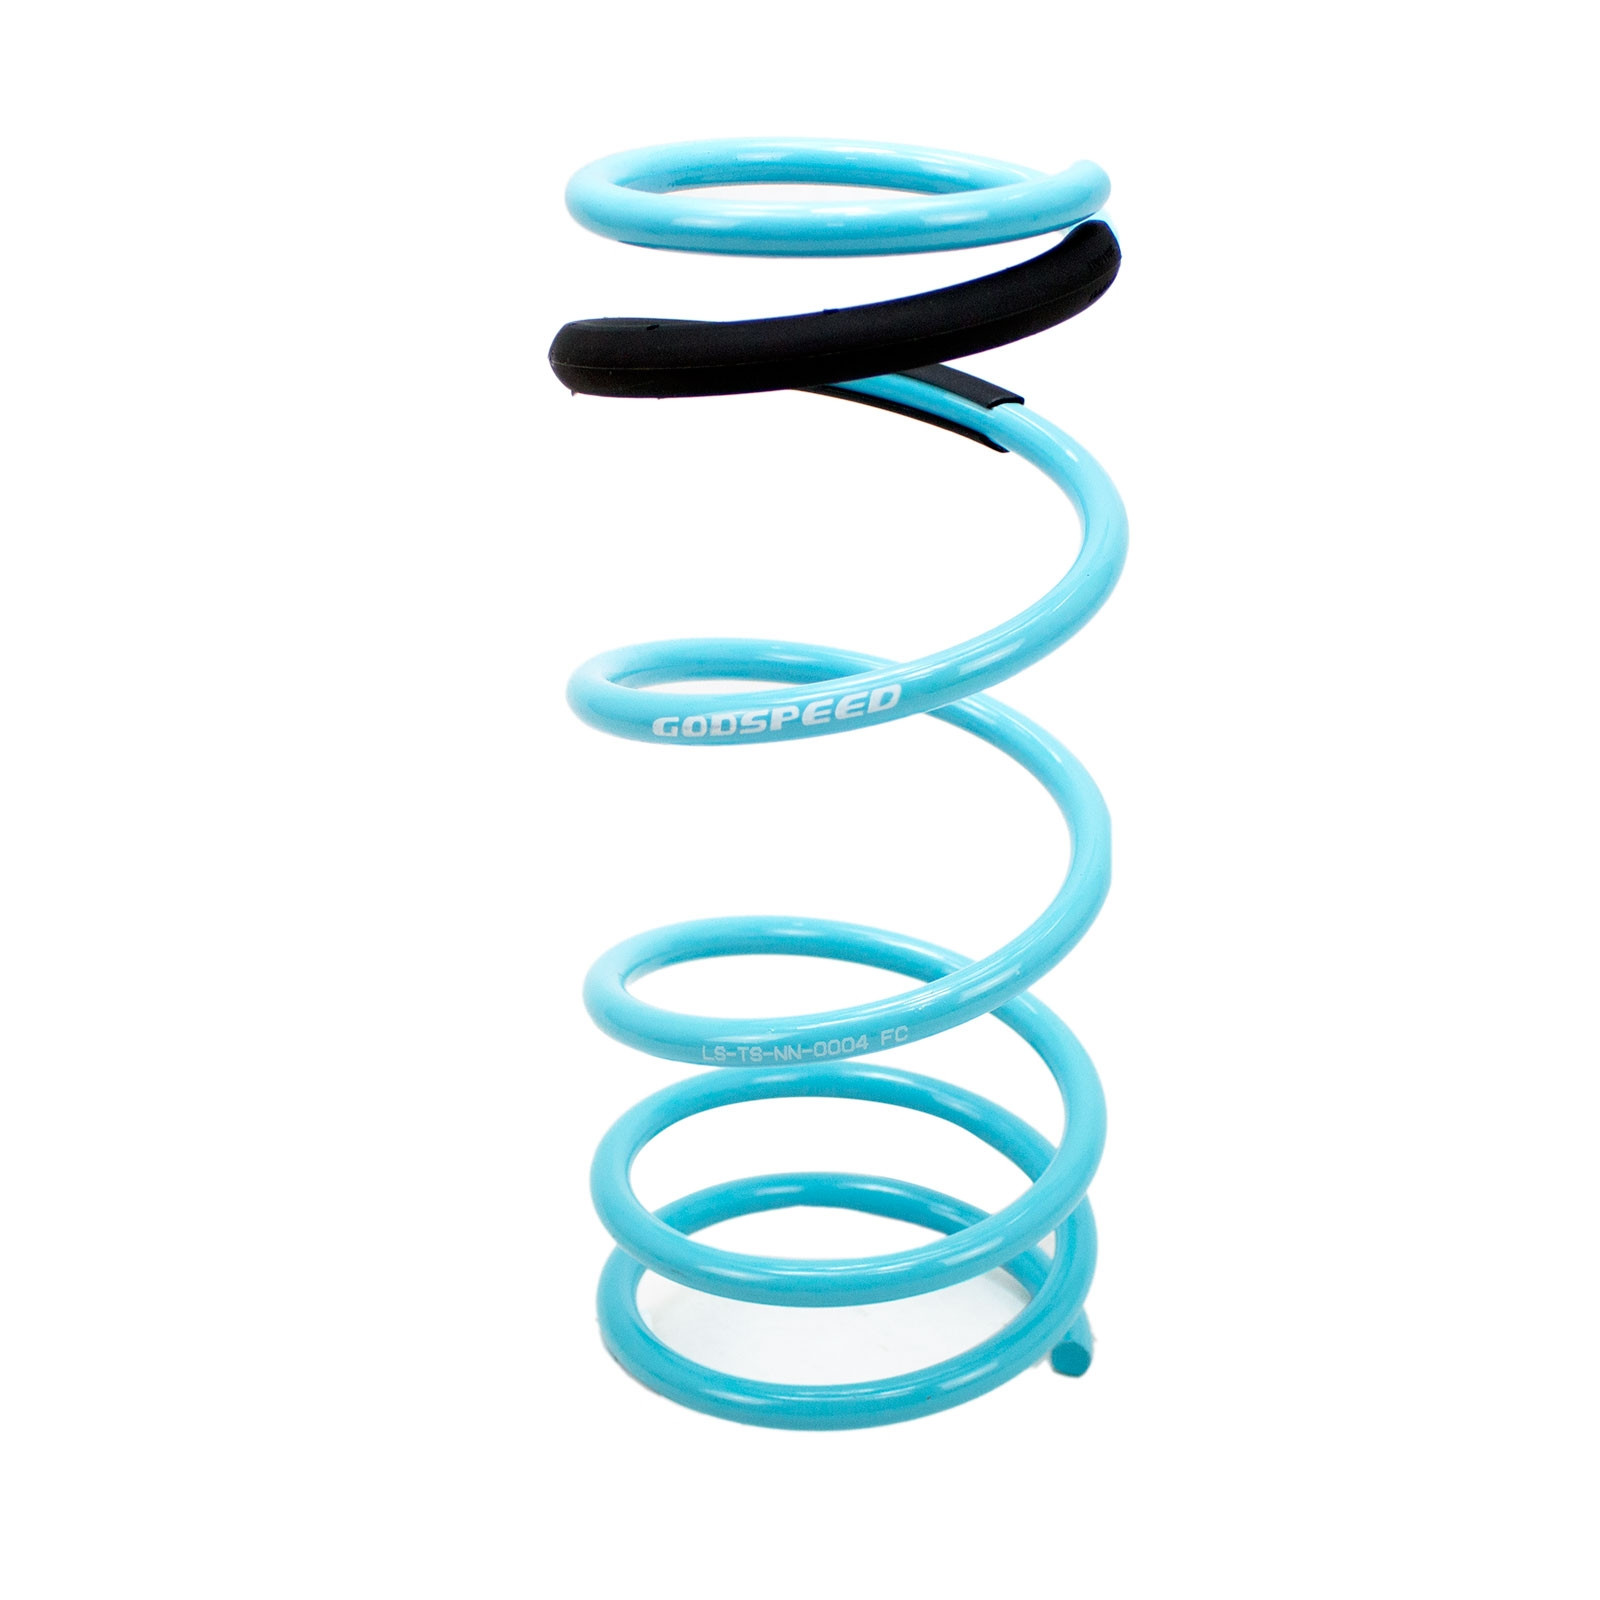 2009-2014 GODSPEED TRACTION-S™ PERFORMANCE LOWERING SPRINGS FOR NISSAN CUBE Z12